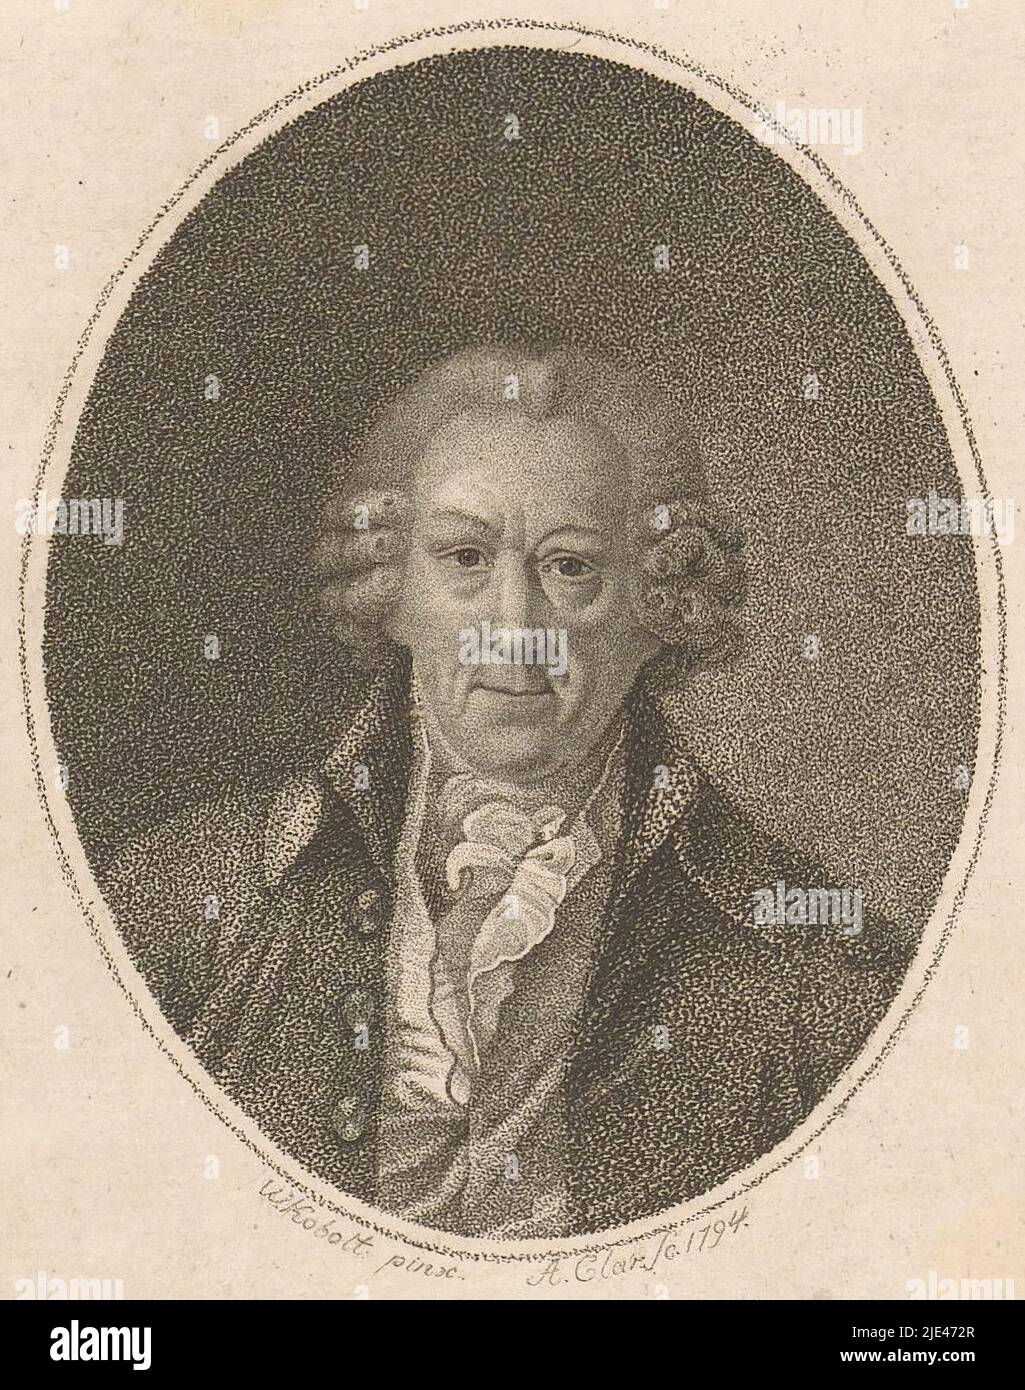 Portrait of Georg Ludwig Böhmer, Johann Friedrich August Clar, after Werner Kobold, 1794, With caption in German., print maker: Johann Friedrich August Clar, (mentioned on object), after: Werner Kobold, (mentioned on object), 1794, paper, h 114 mm - w 85 mm Stock Photo